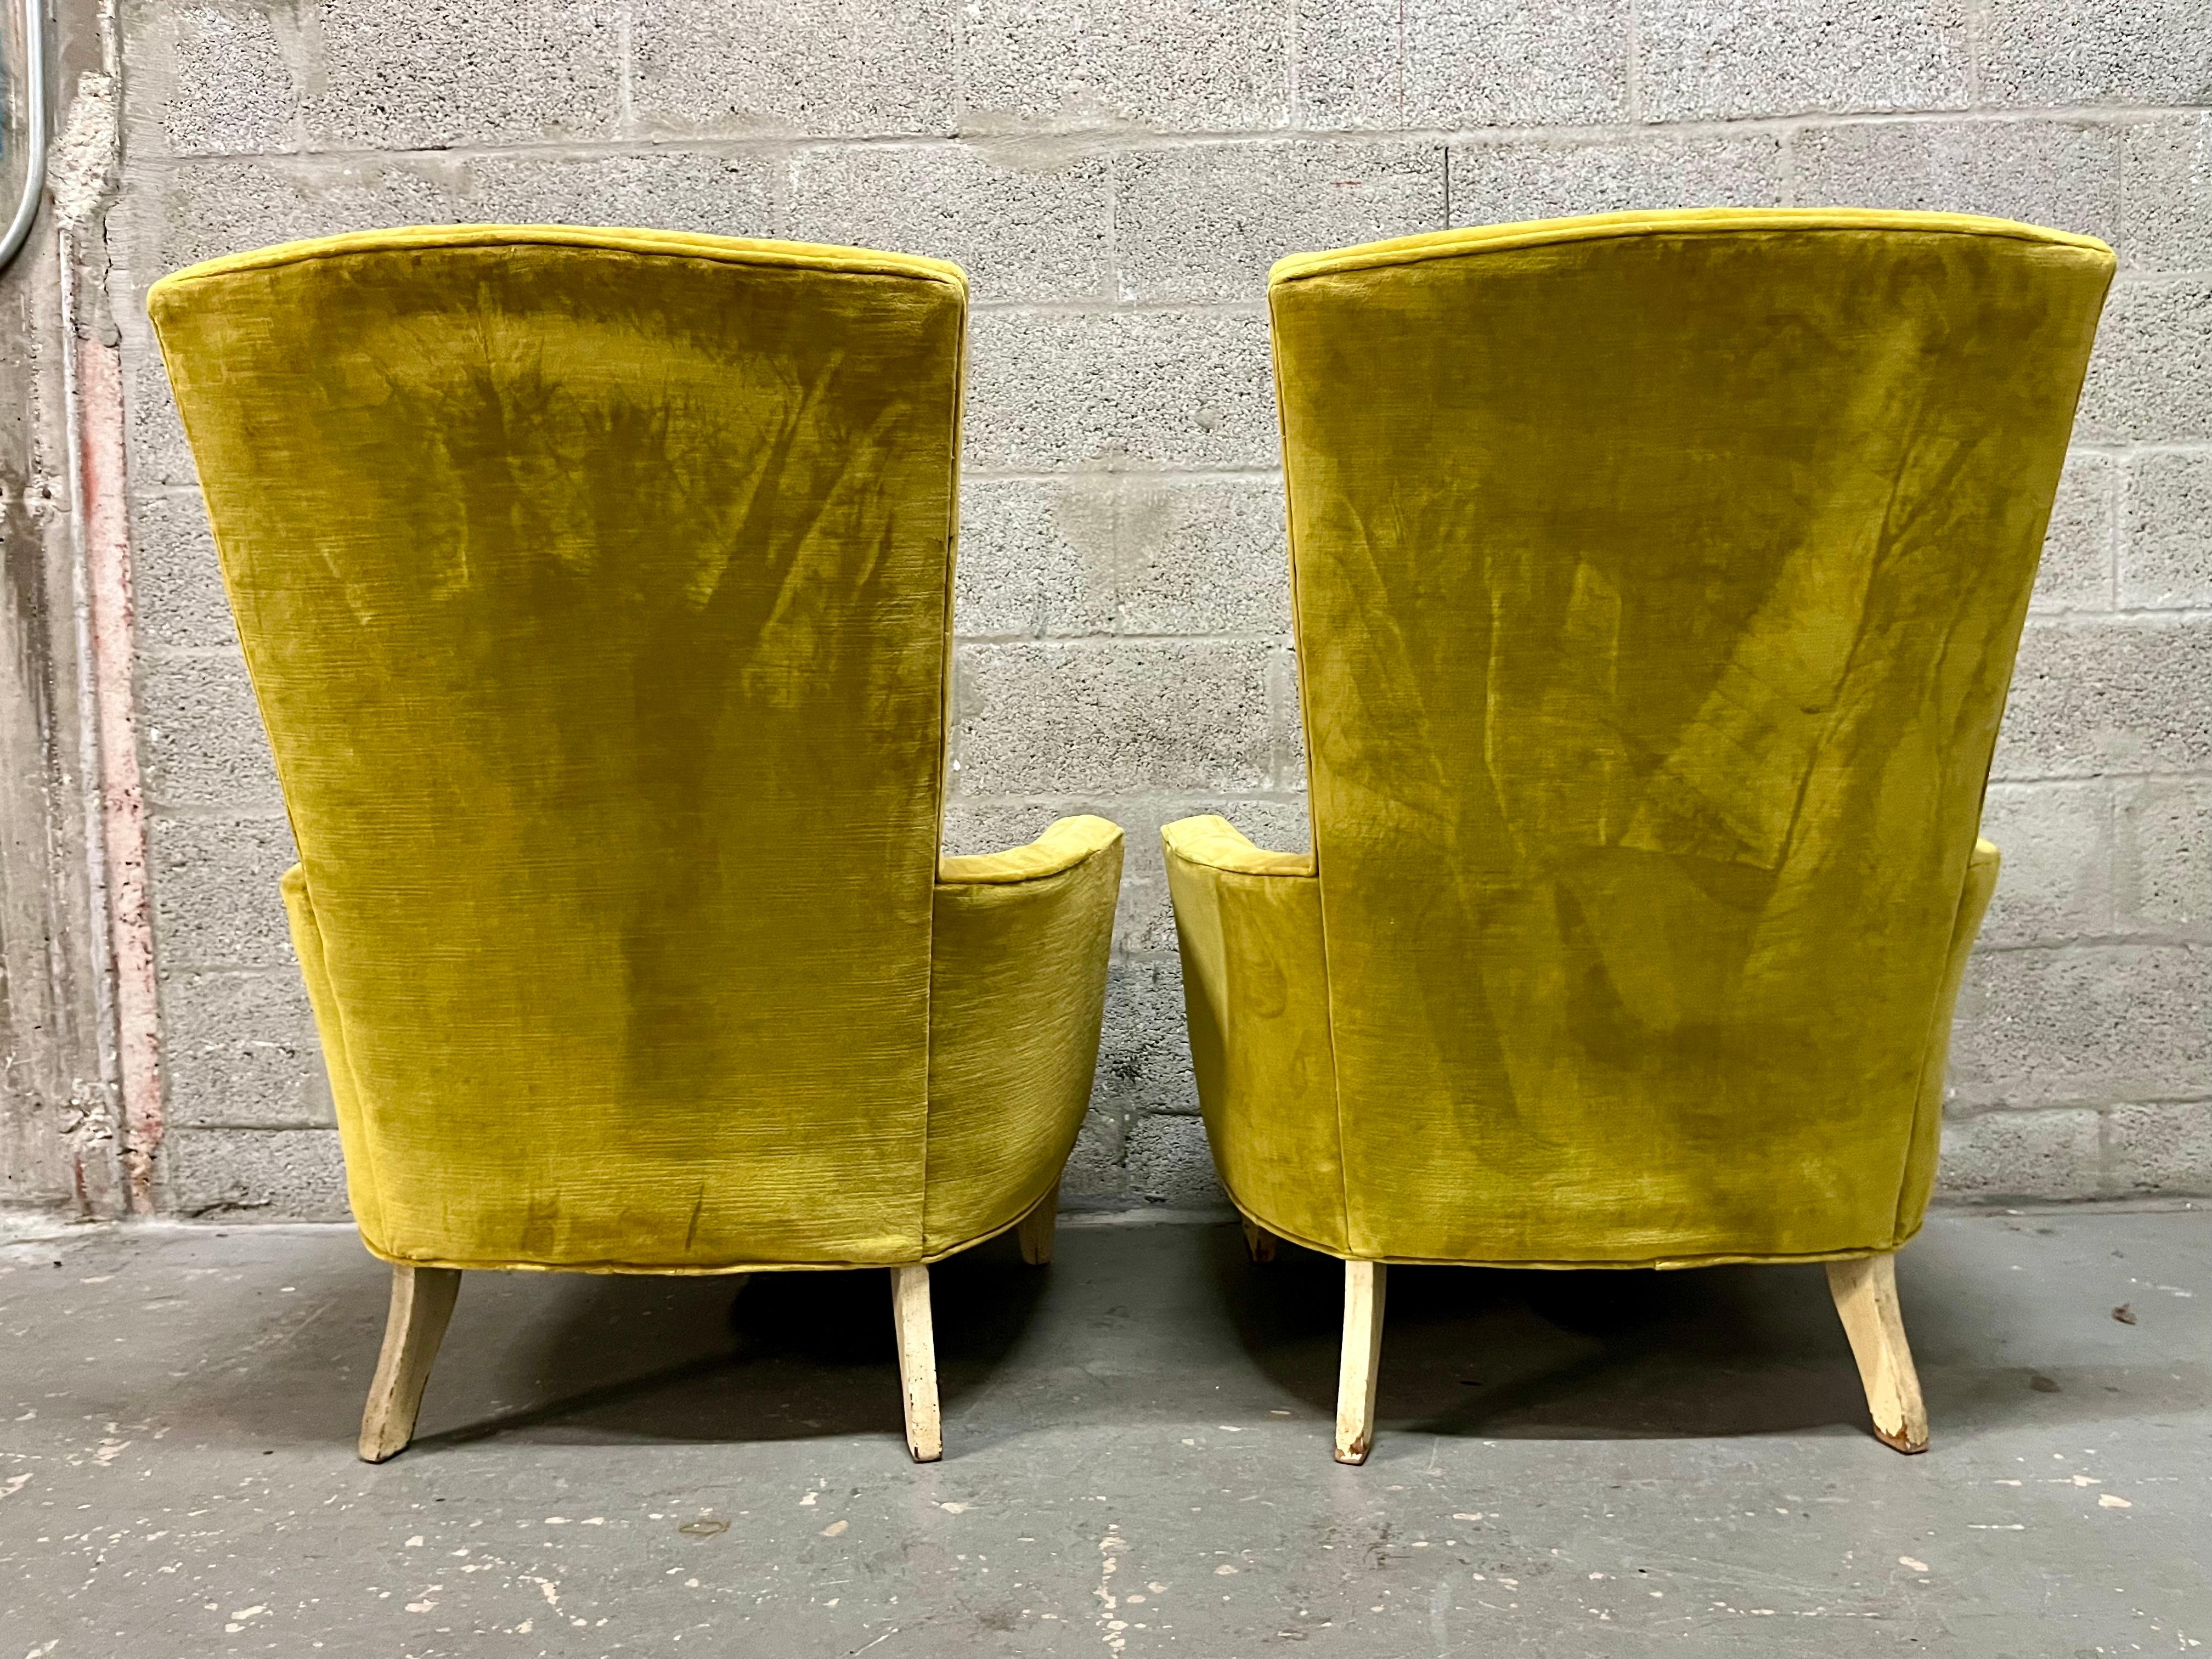 A Pair of Hollywood Regency Upholstered Lounge Chairs by Silver Craft. C. 1960s For Sale 4